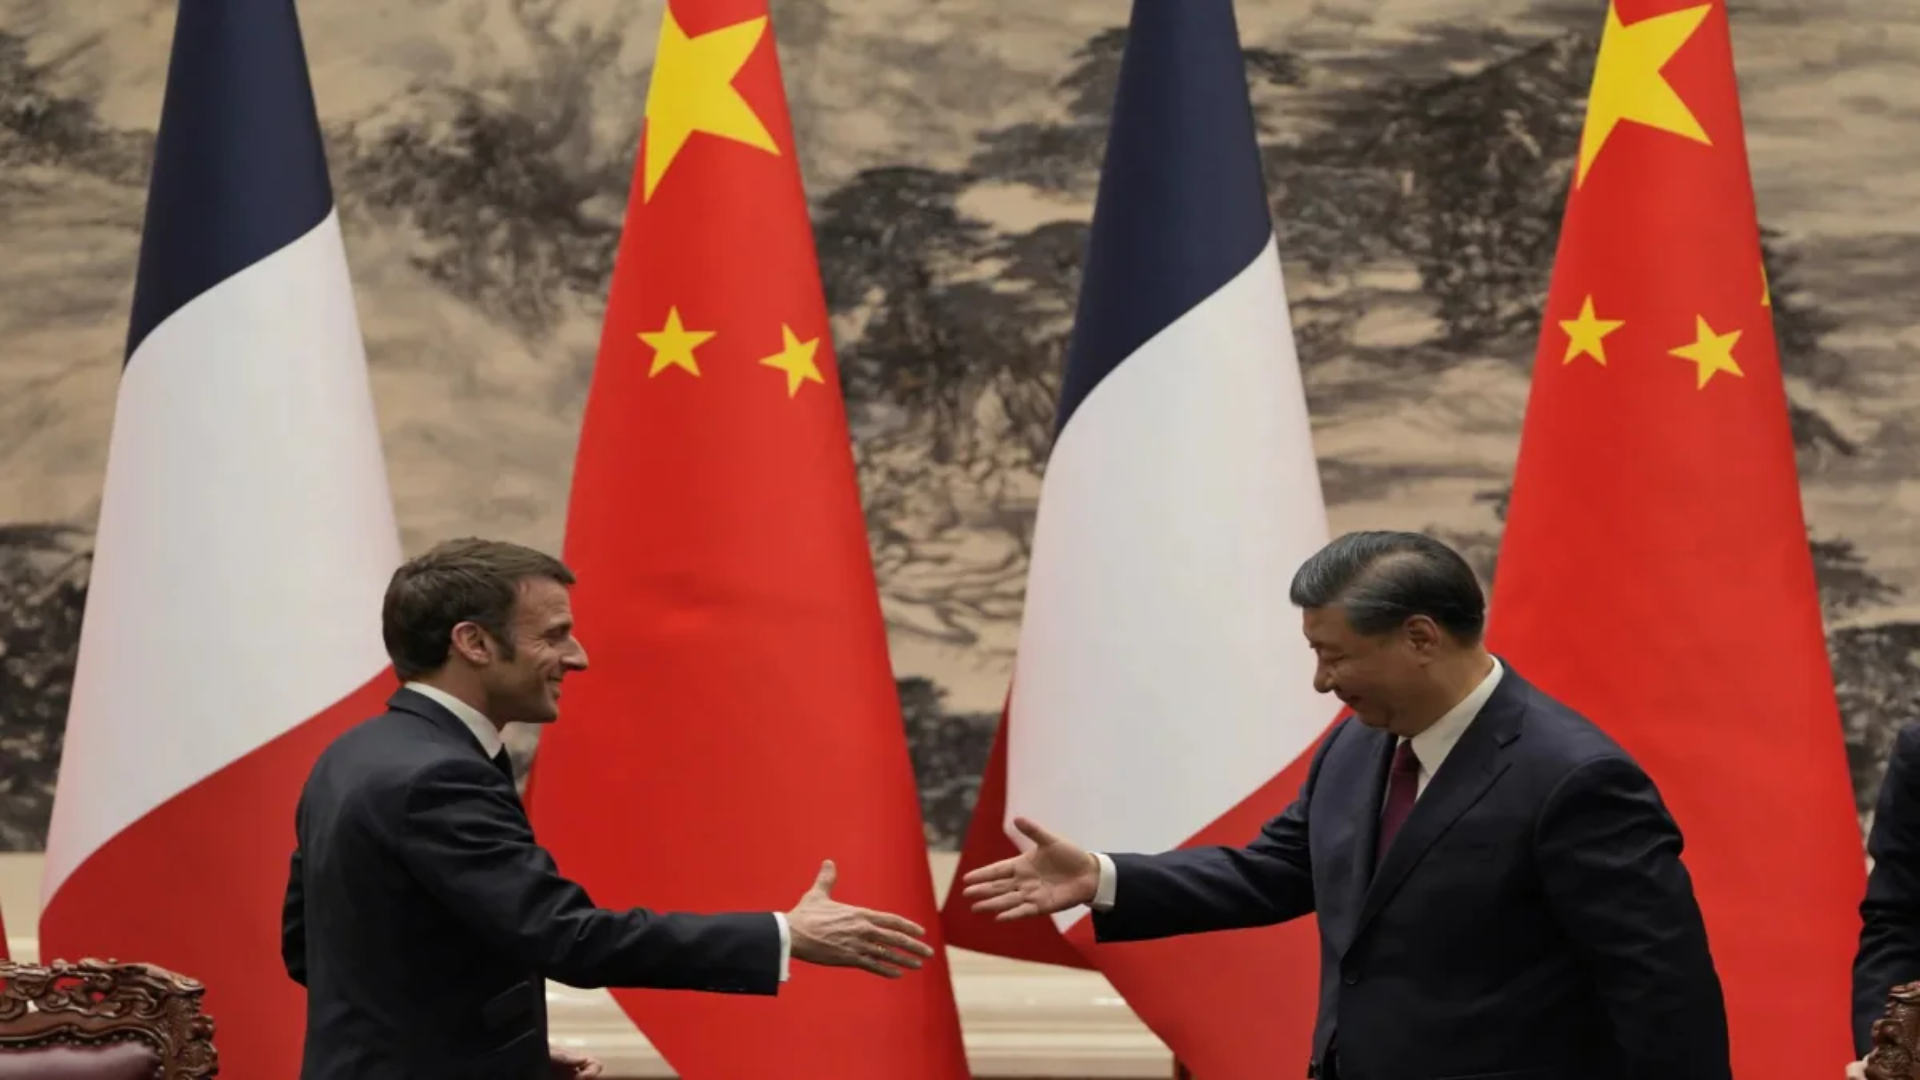 Will French President's Call for Economic Reset with China Impact Xi's Visit To France